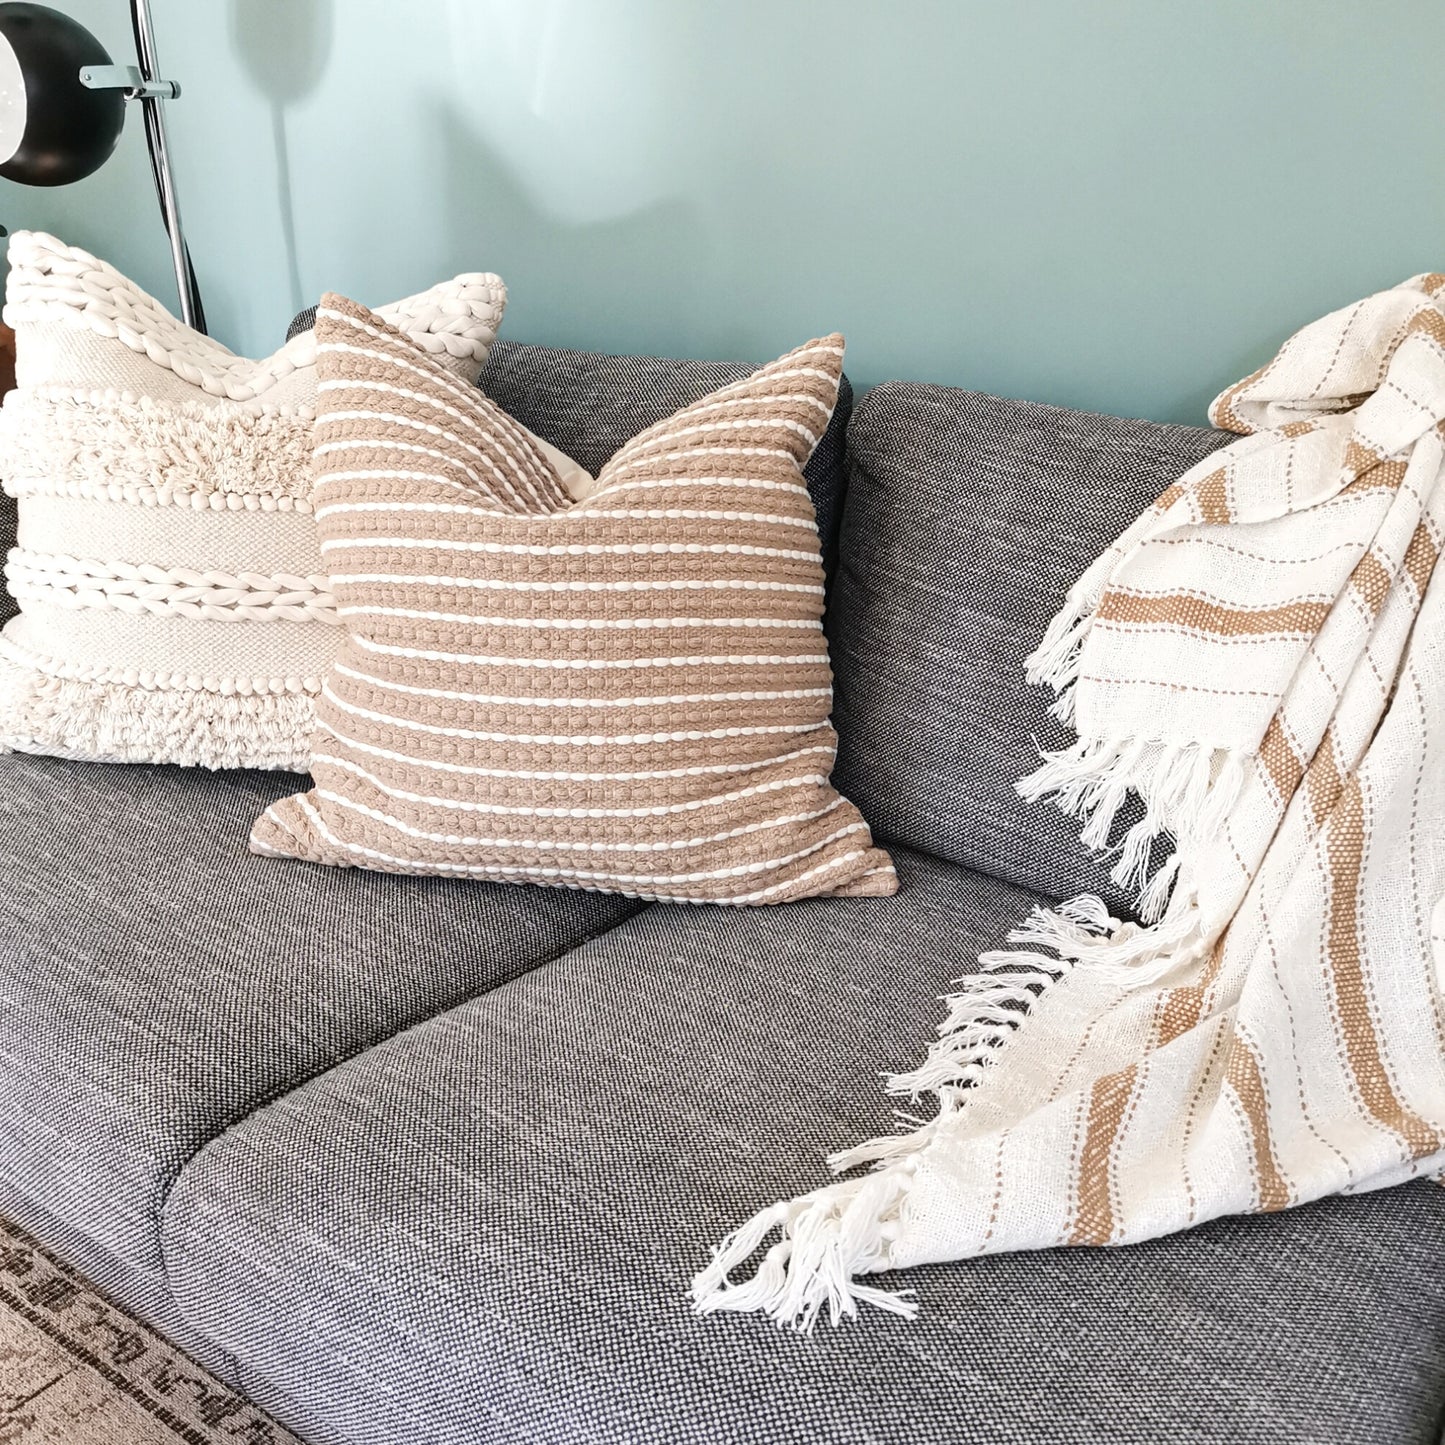 Boho pillows and blankets in a living room sofa